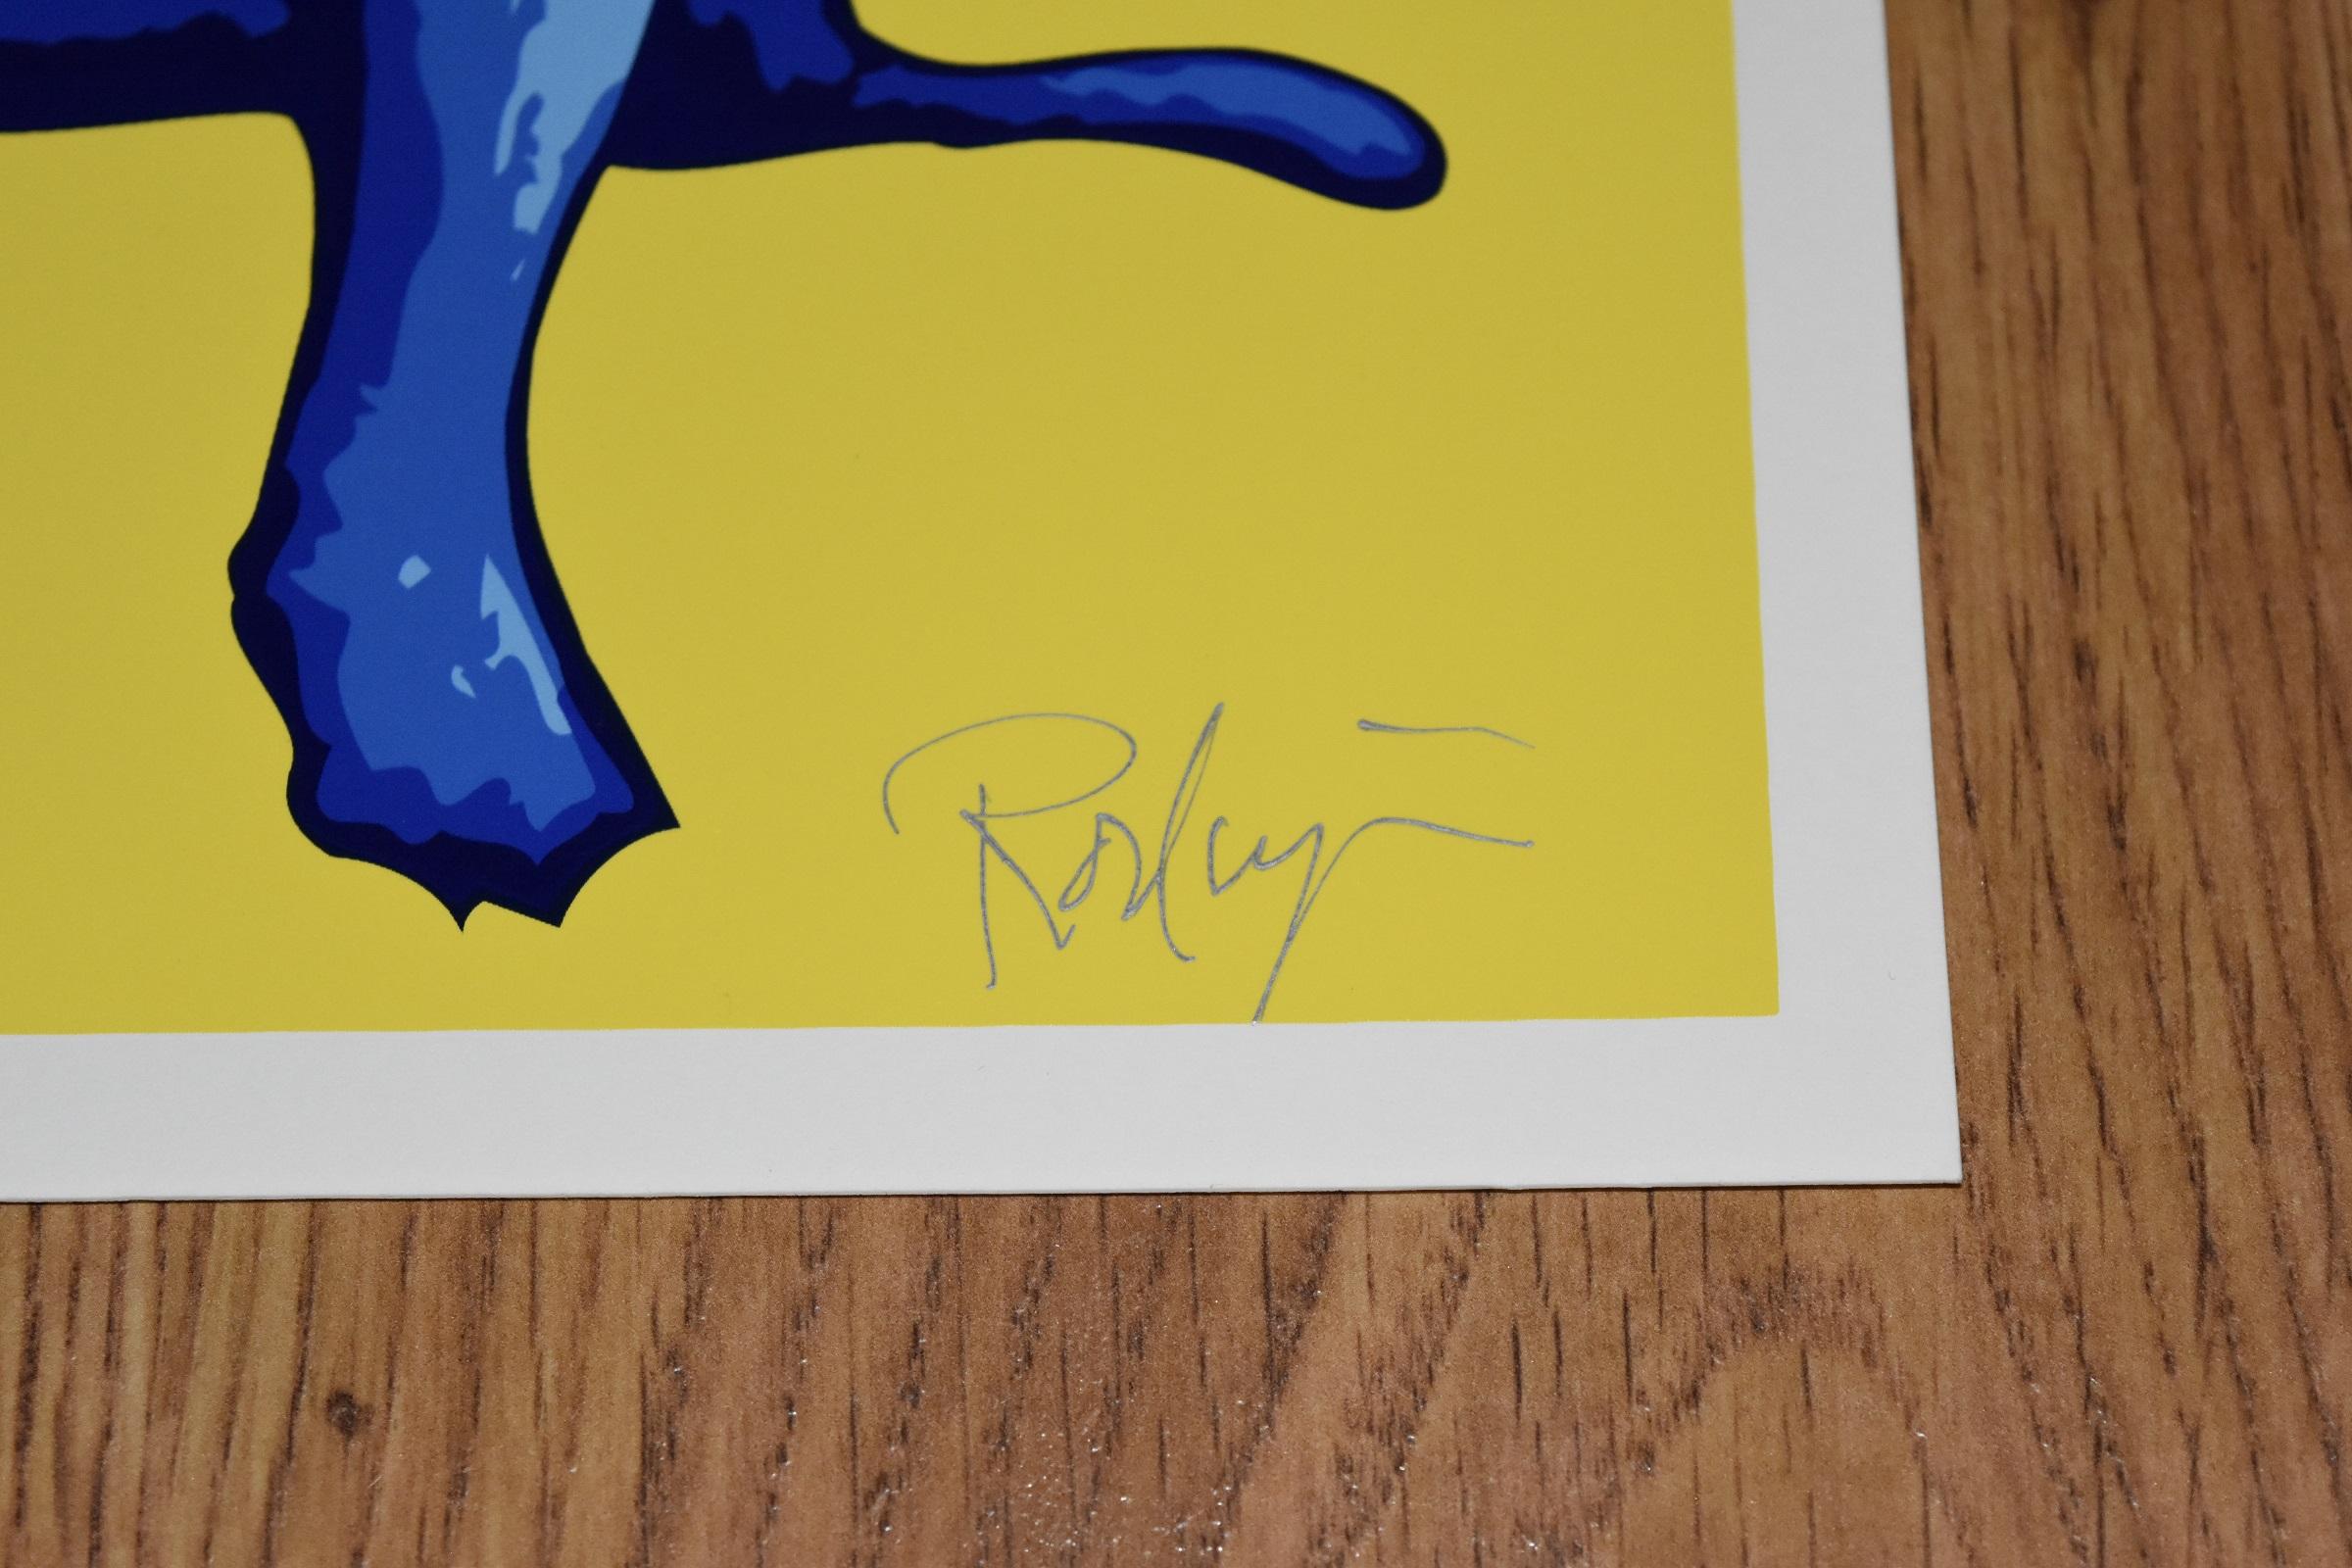 This Blue Dog work consists of a blue dog with soulful eyes on a bright yellow background.  This pop art animal original silkscreen print on paper is guaranteed authentic and is hand signed by the artist.

Artist:  George Rodrigue
Title:  Blue Dog